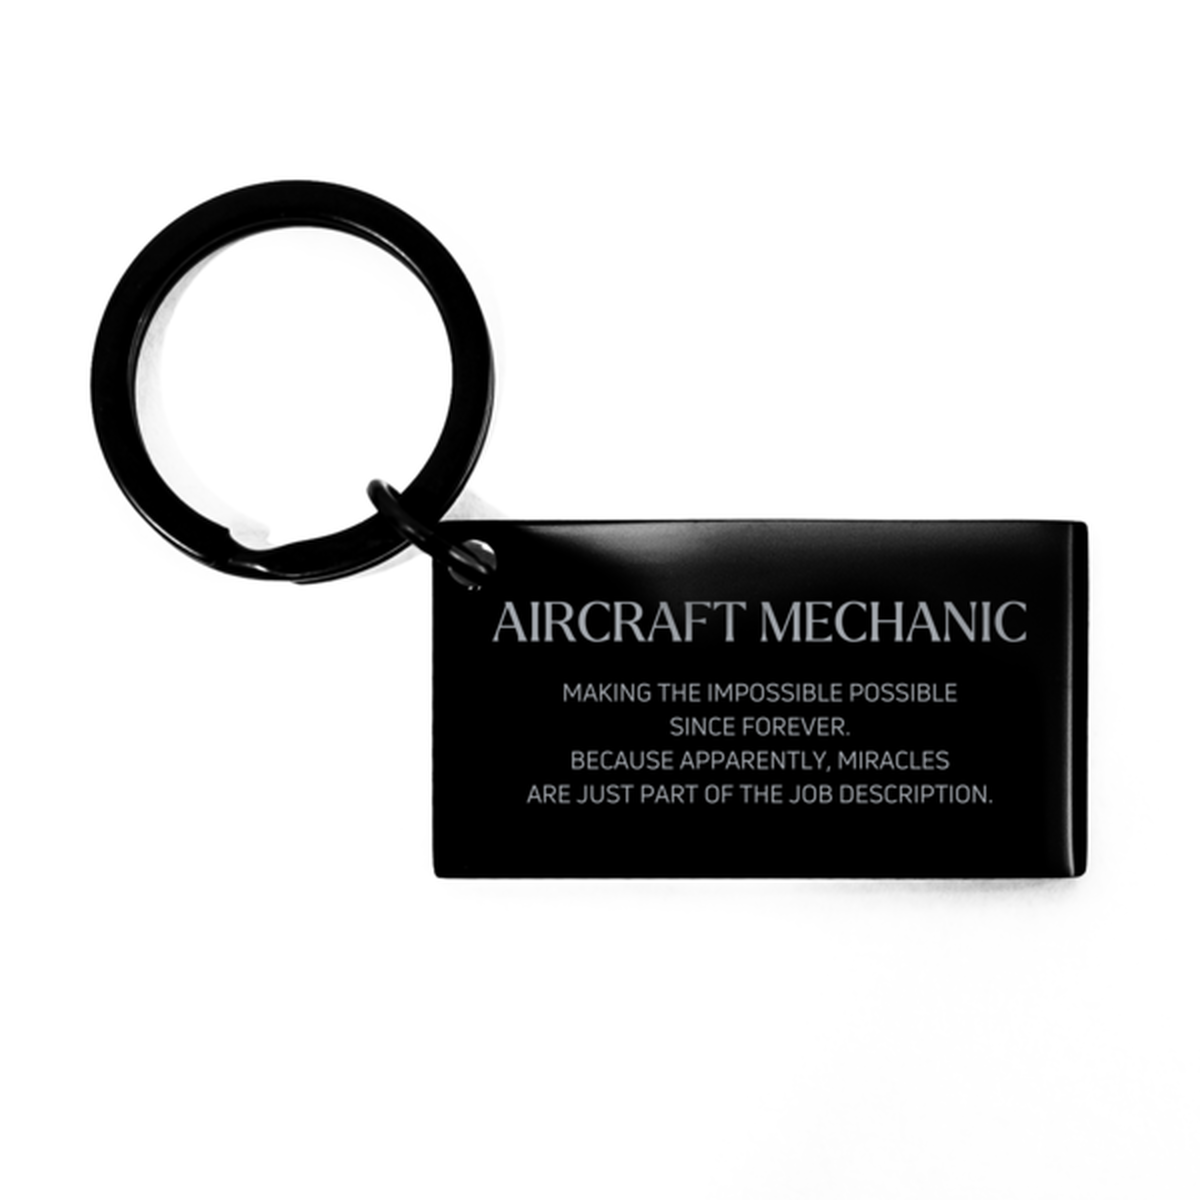 Funny Aircraft Mechanic Gifts, Miracles are just part of the job description, Inspirational Birthday Keychain For Aircraft Mechanic, Men, Women, Coworkers, Friends, Boss